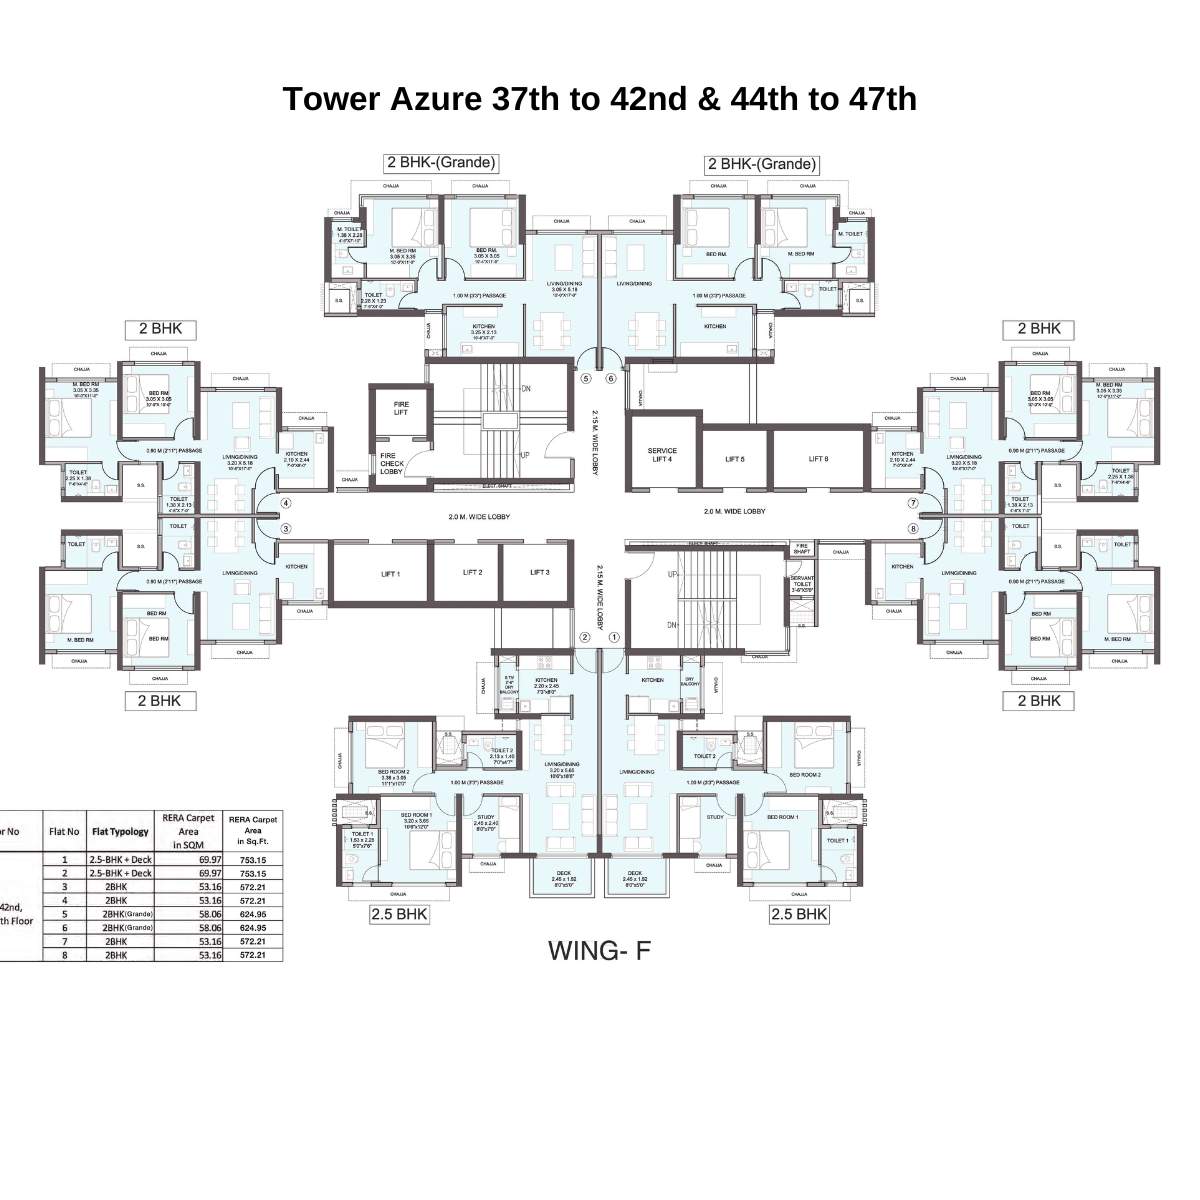 Wadhwa-Atmosphere-Floor-Plan-Tower-Azure-37th-to-42nd-44th-to-47th